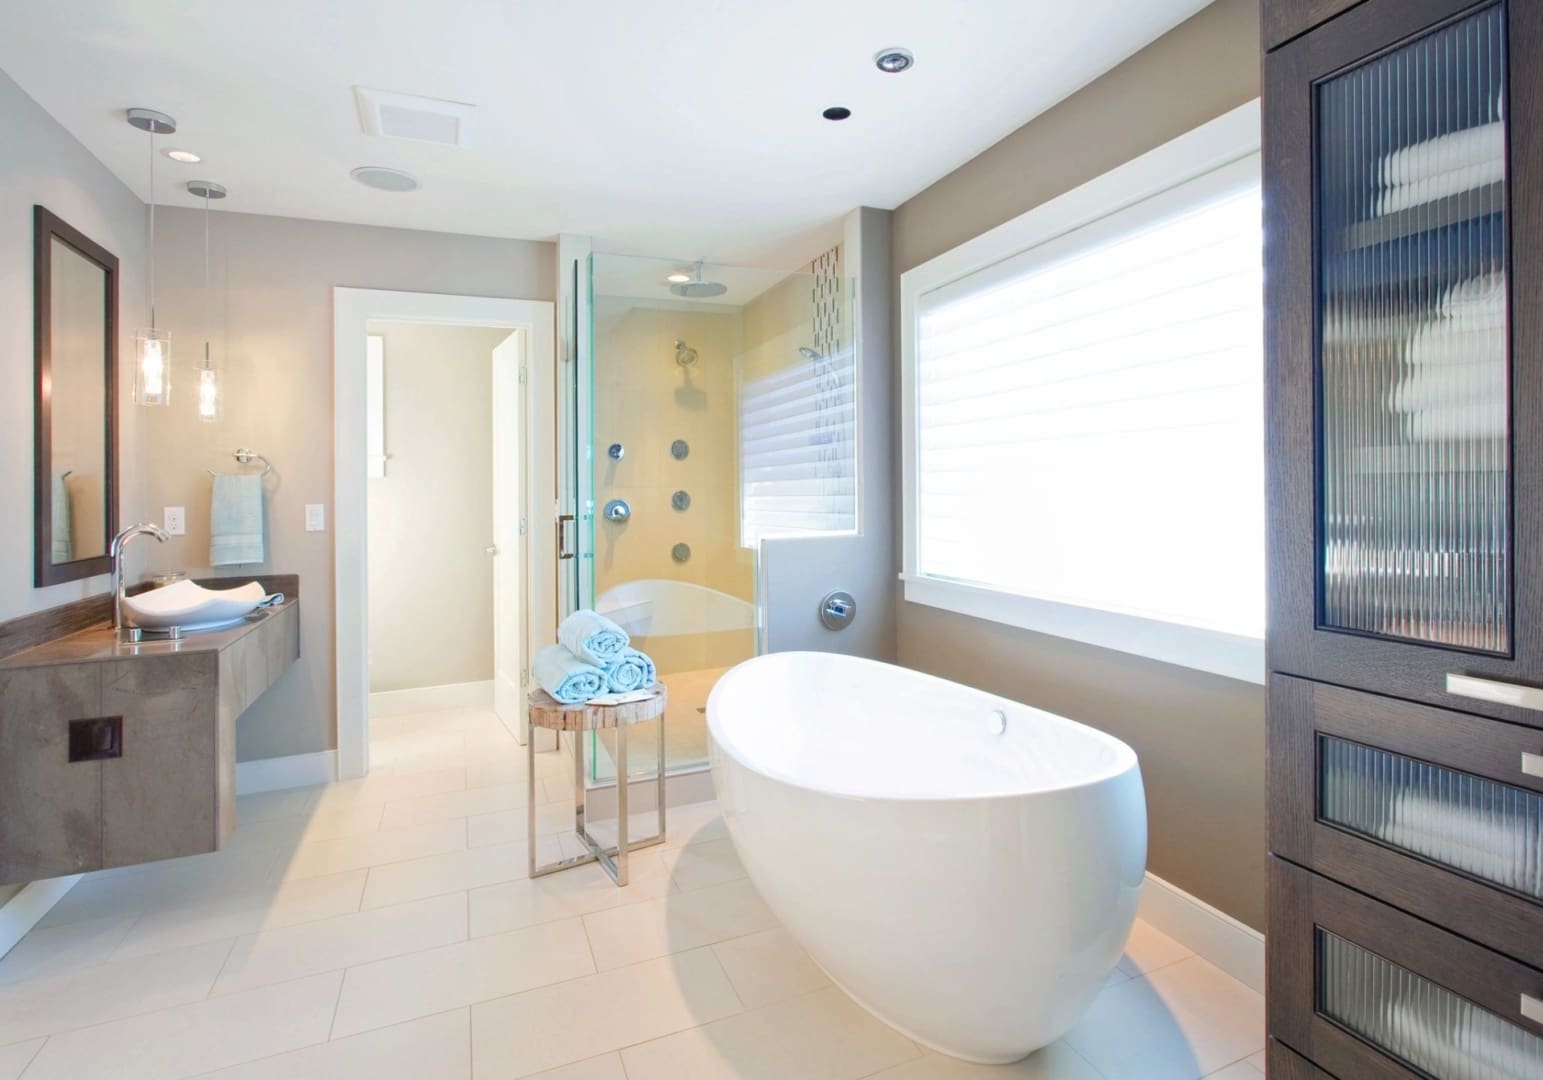 Modern bathroom in white and light tones, with an egg-shaped tsand-alone bathtub, a glass walk-in shower, and a large window. 